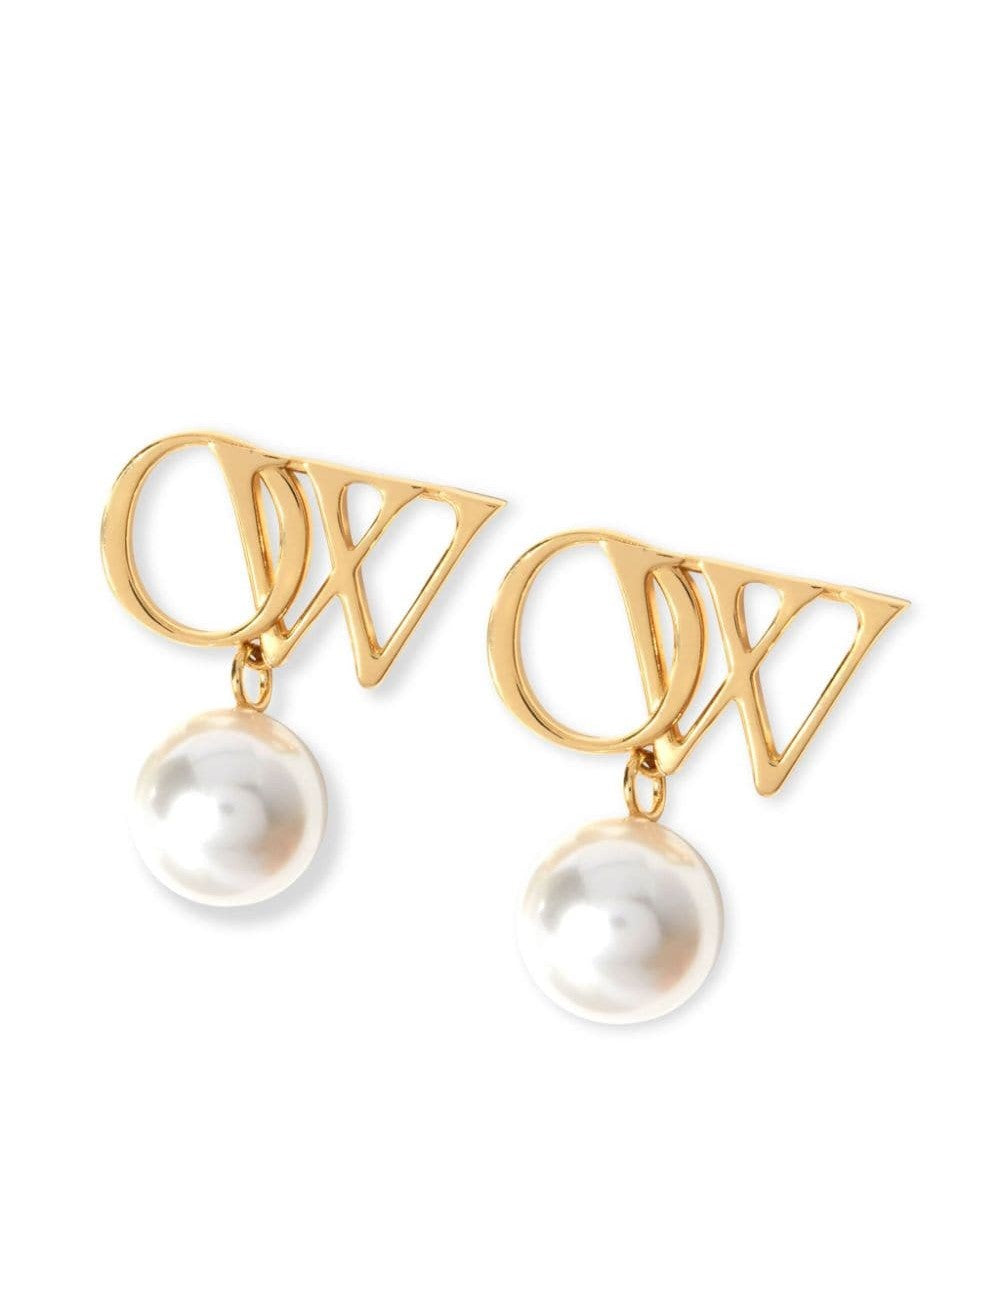 OFF WHITE OW PEARL EARRINGS